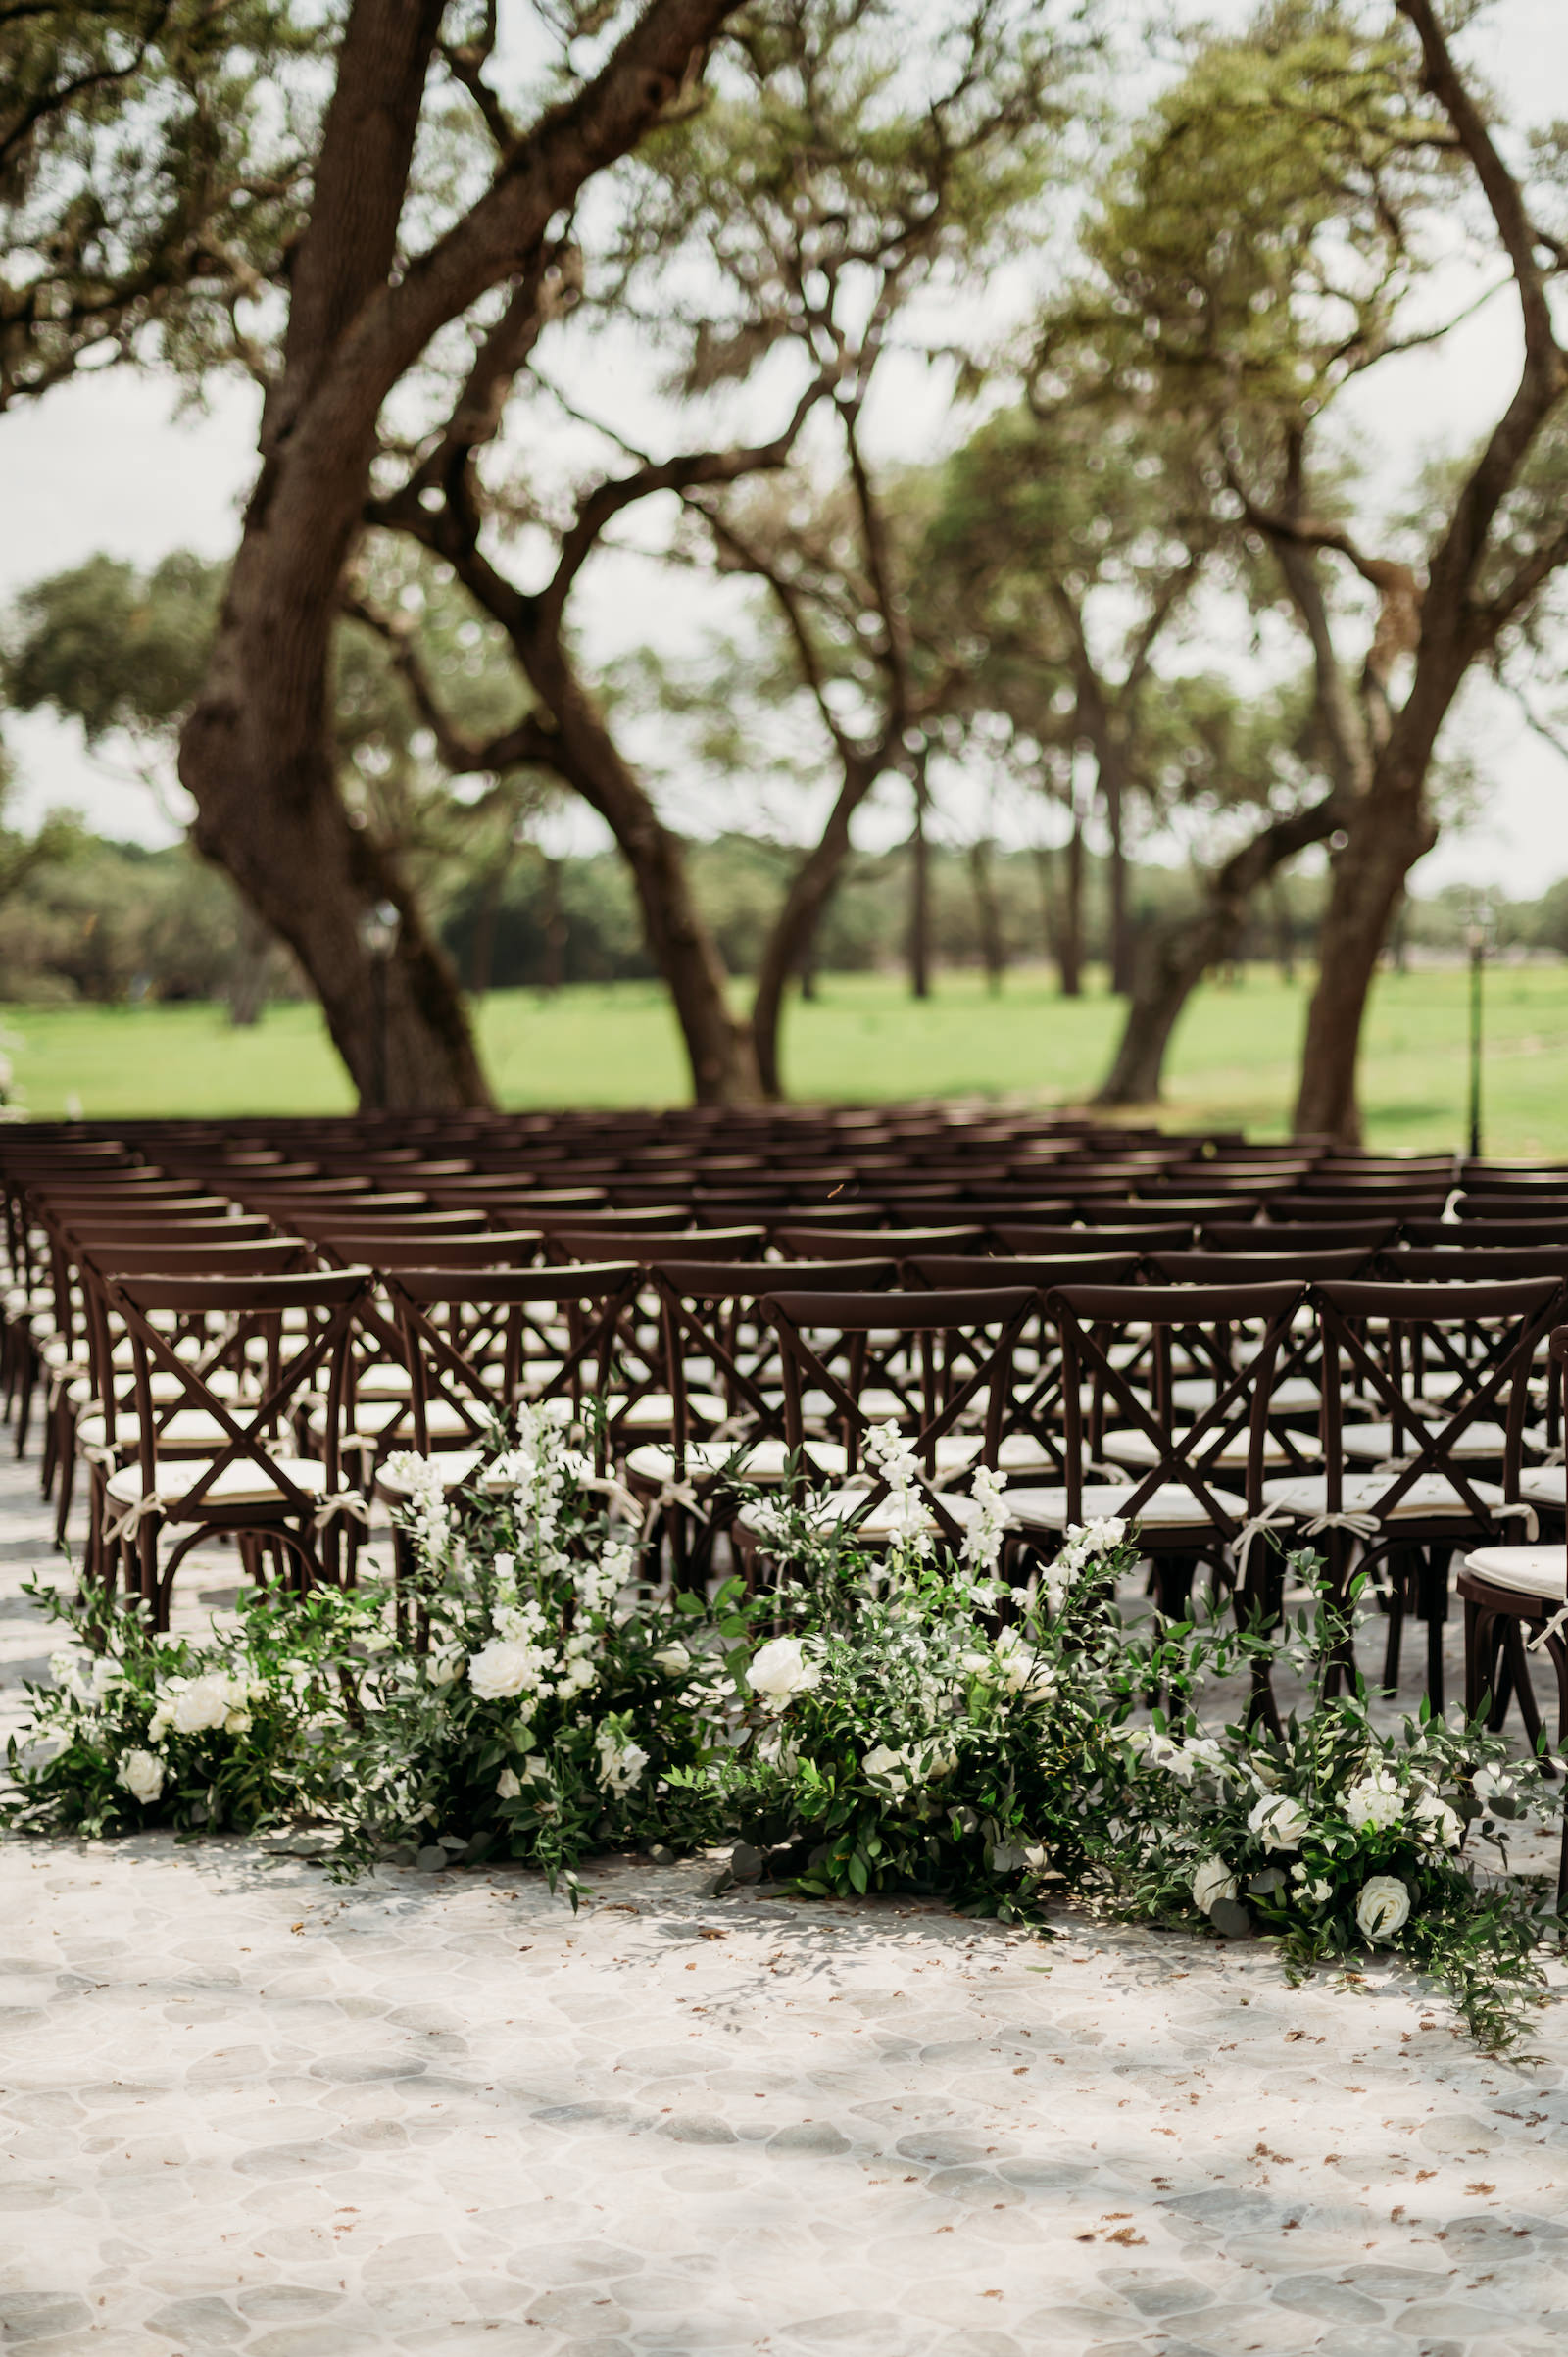 Classic Outdoor Wedding Reception Decor, Dark Wooden Cross Back Chairs, Lush Greenery and White Floral Arrangements